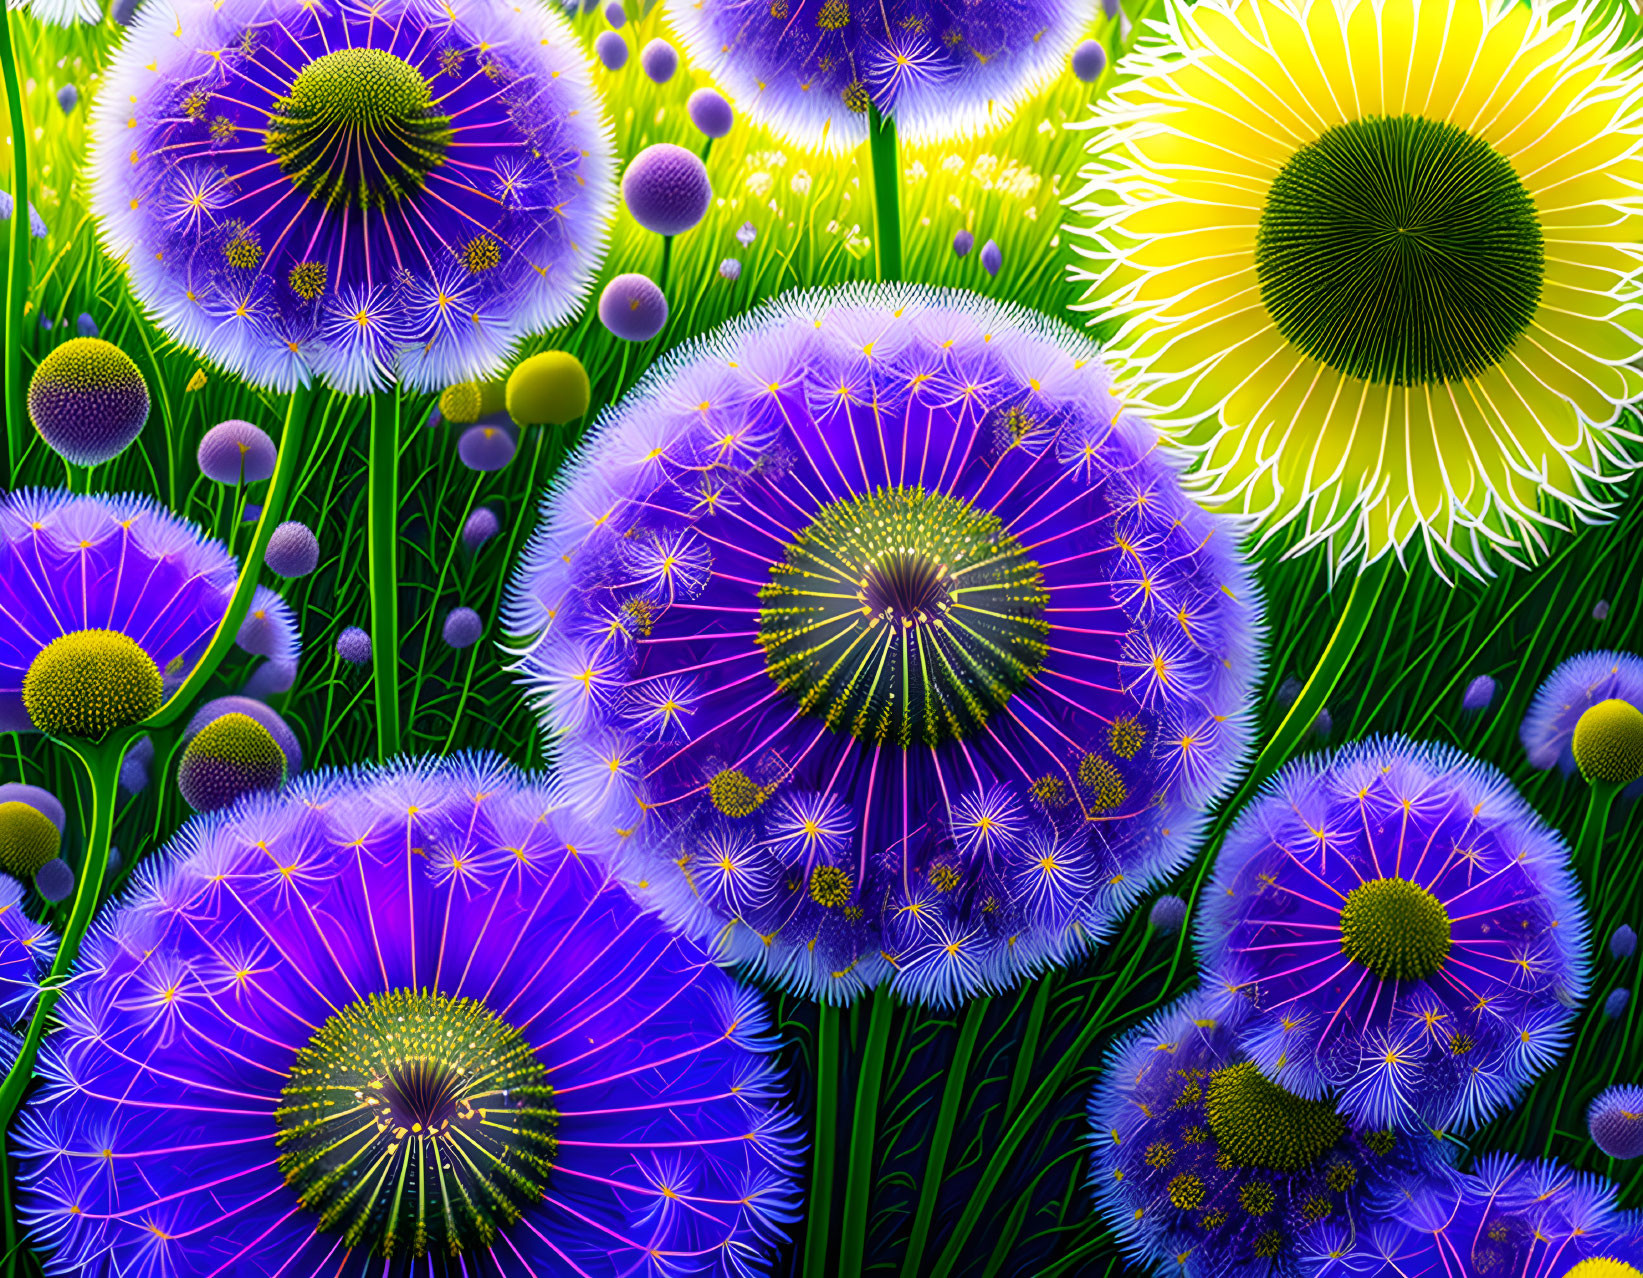 Colorful digital artwork: Fantastical flowers in purple and yellow hues